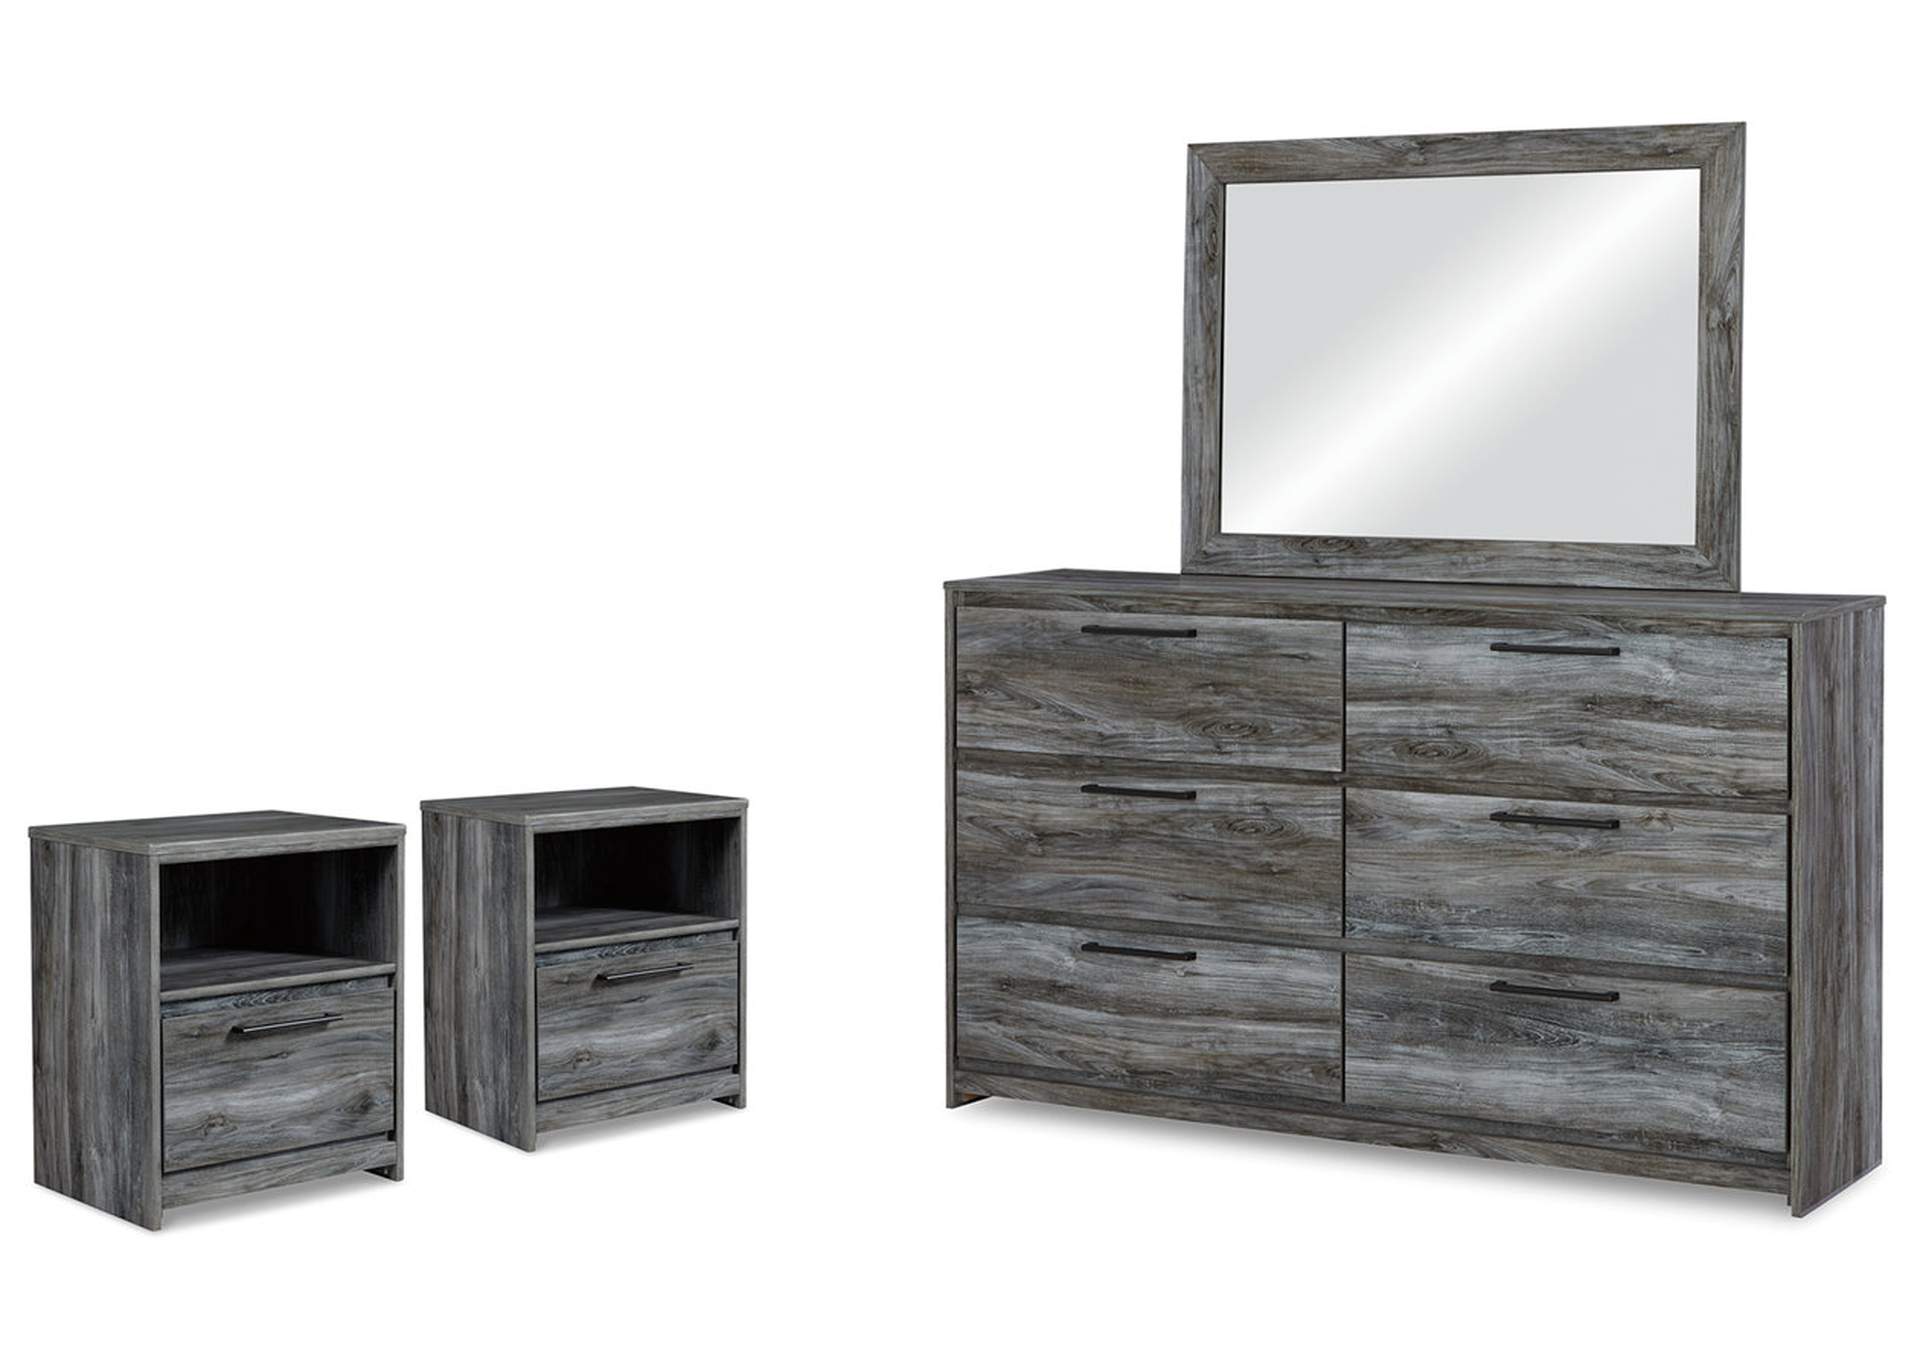 Baystorm Dresser, Mirror and 2 Nightstands,Signature Design By Ashley